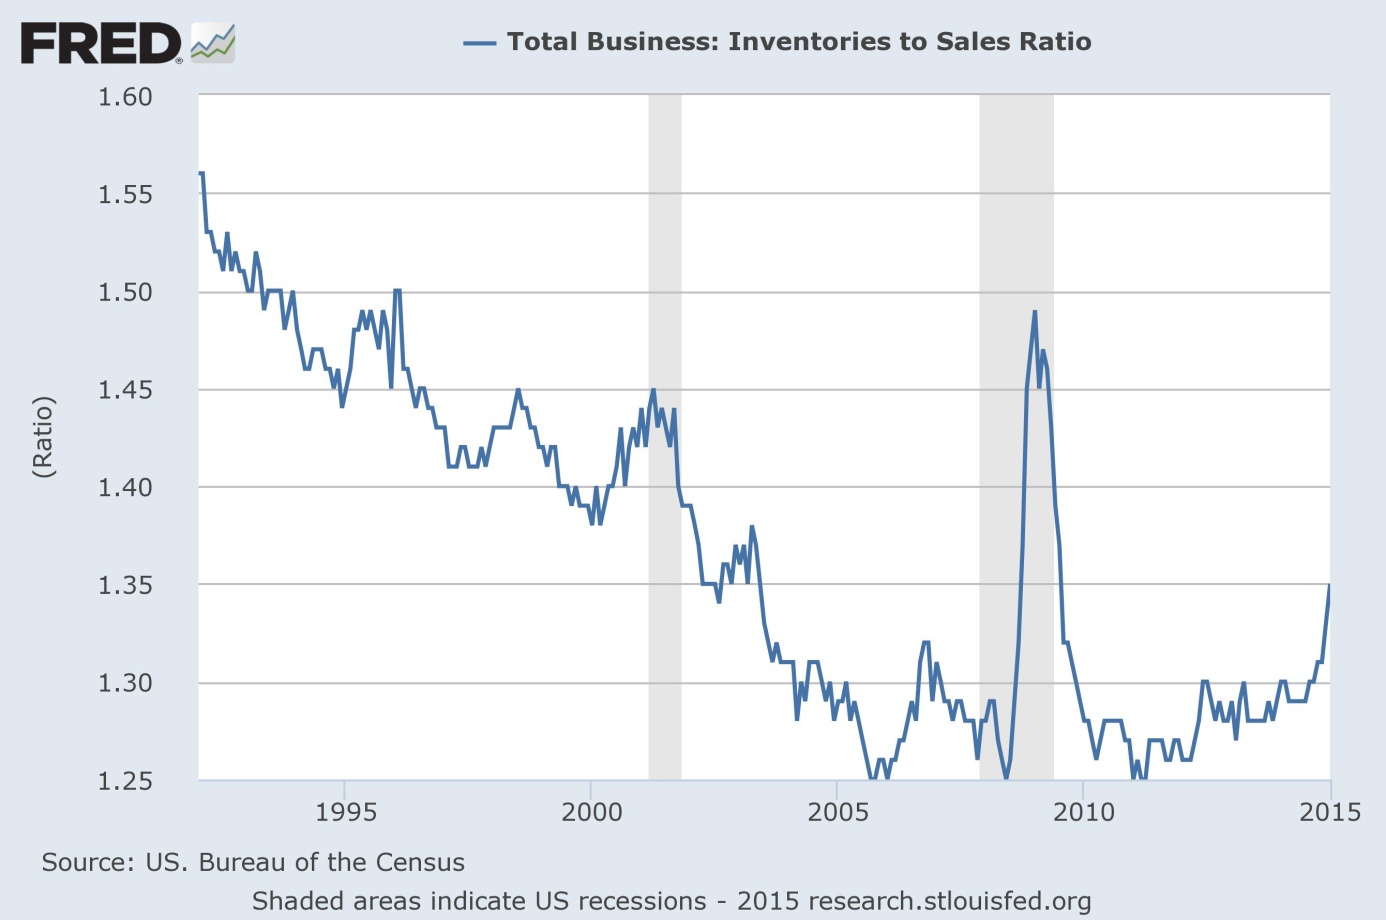 Total business inventories to sales ration from 1994 to 2015